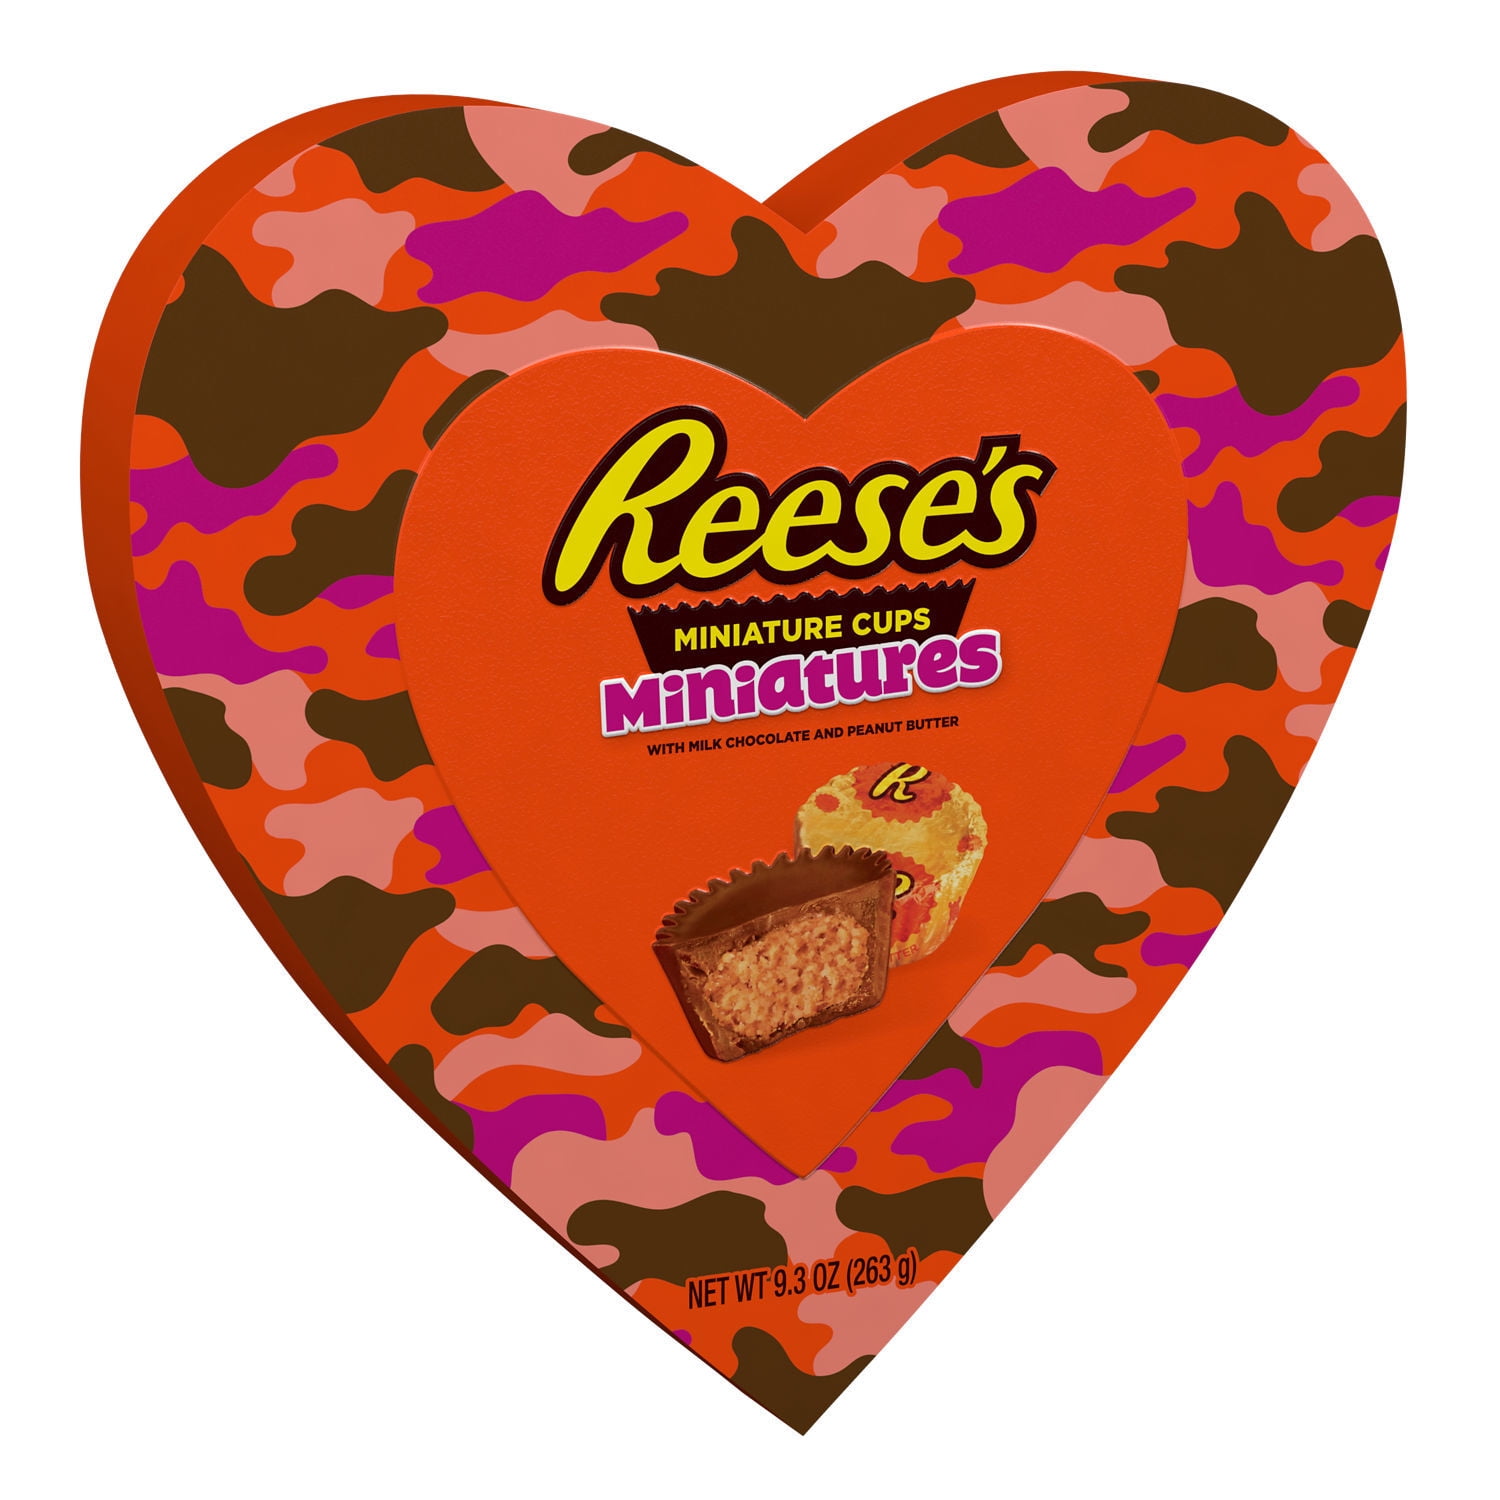 REESE'S, Miniatures Milk Chocolate Peanut Butter Cups Candy, Valentine's Day, 9.3 oz, Heart Gift Box